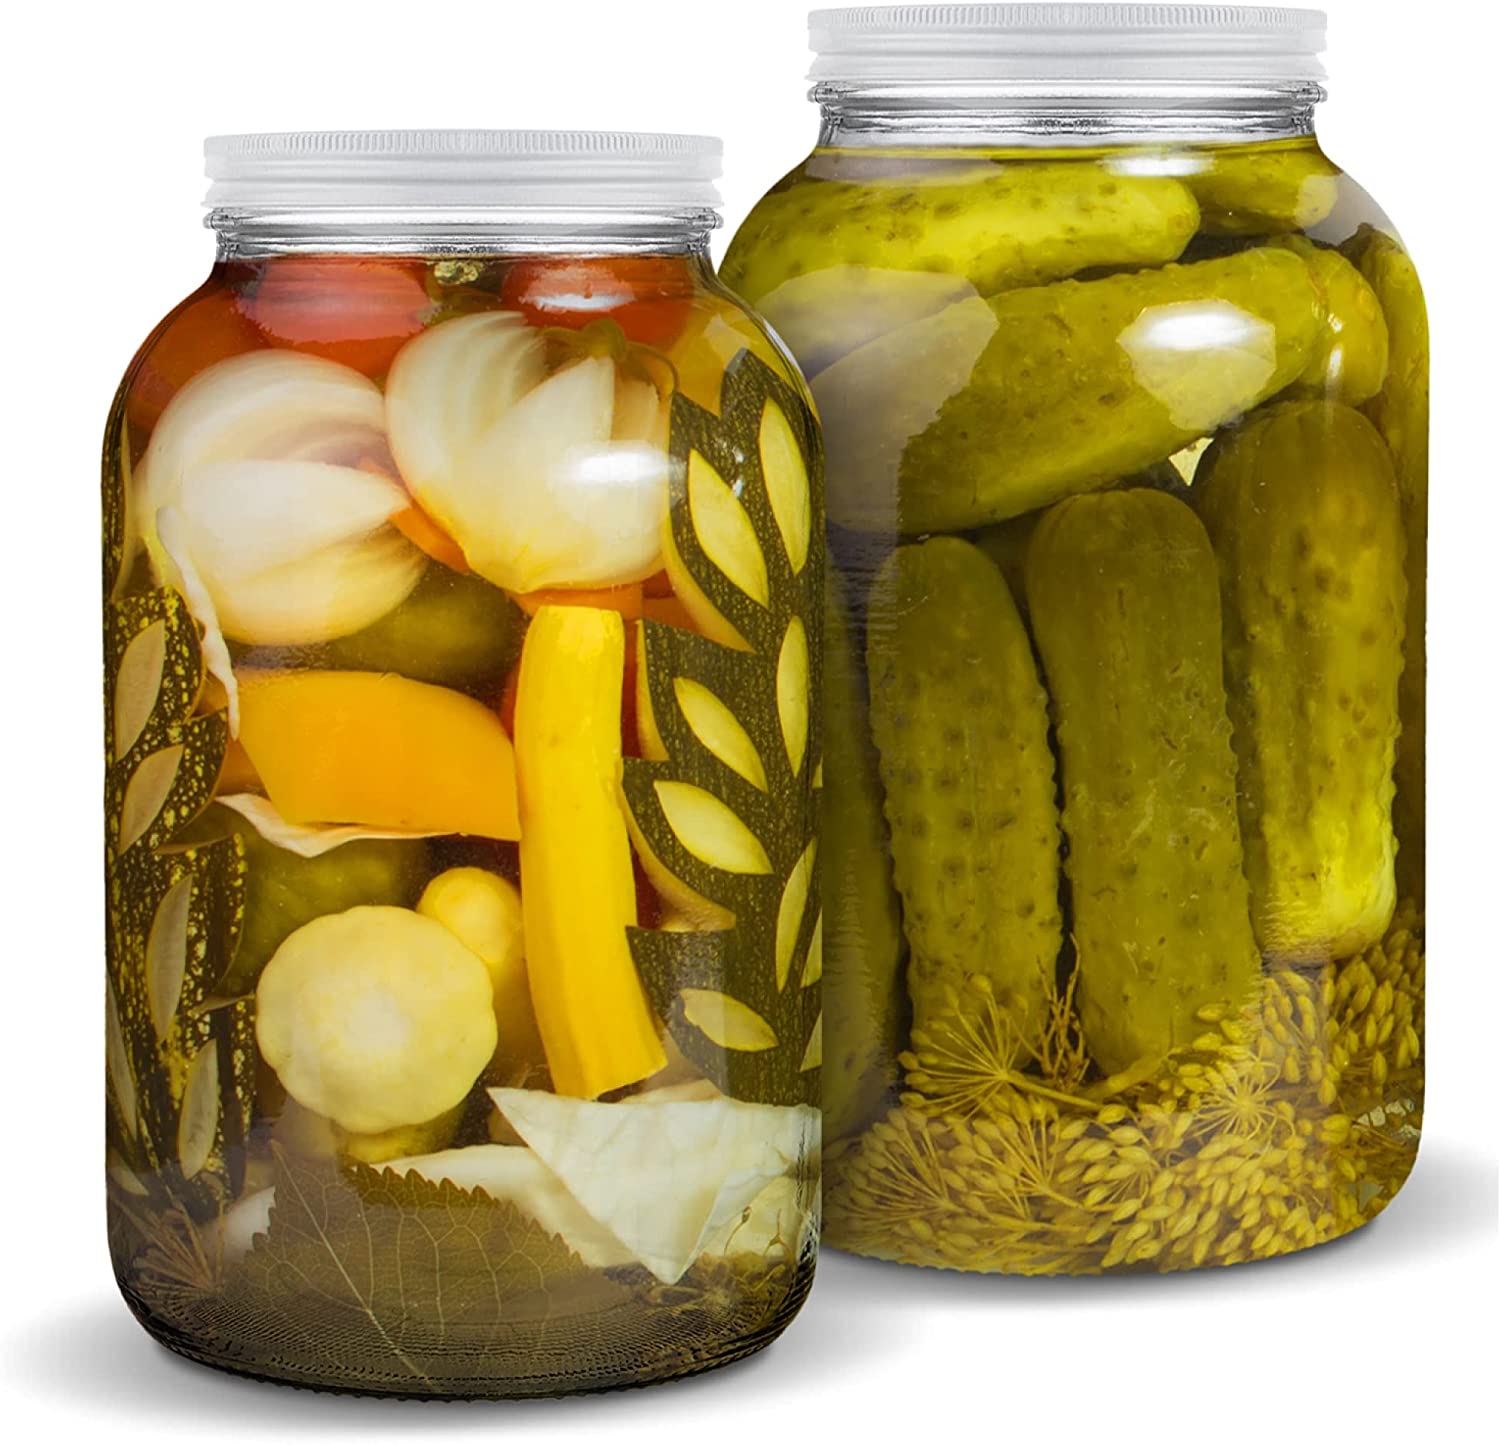 Multi-Purpose Large Mason Jar with Metal Lid for Pickles, Spices, Mason Jars  Wide Mouth with Airtight Lids for Canning, Fermenting 